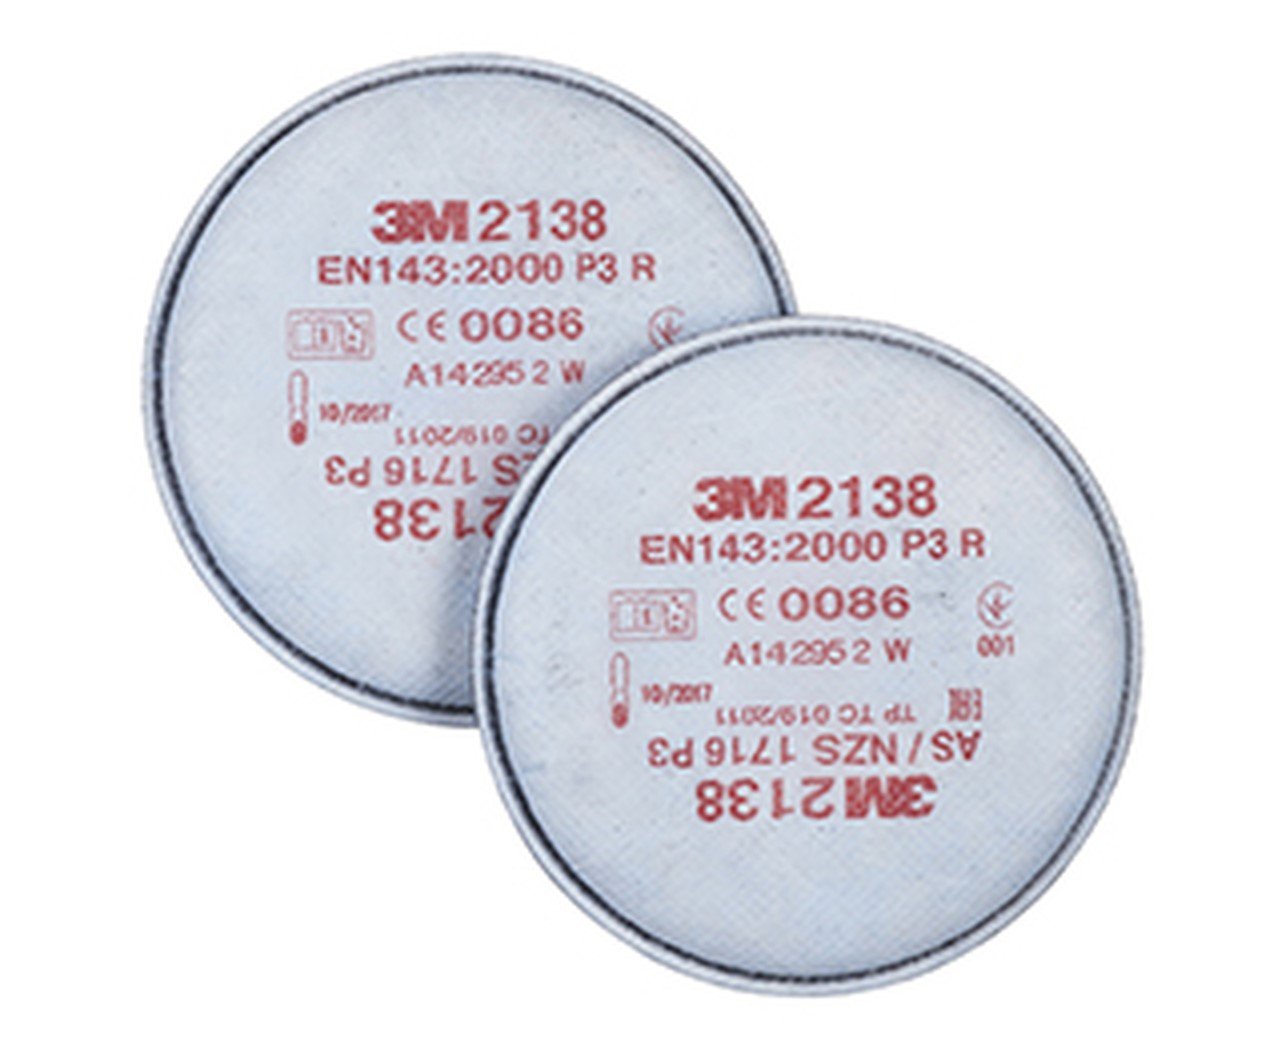 3M Particulate Filter 2138 Pair 04 Respiratory Protection 07 